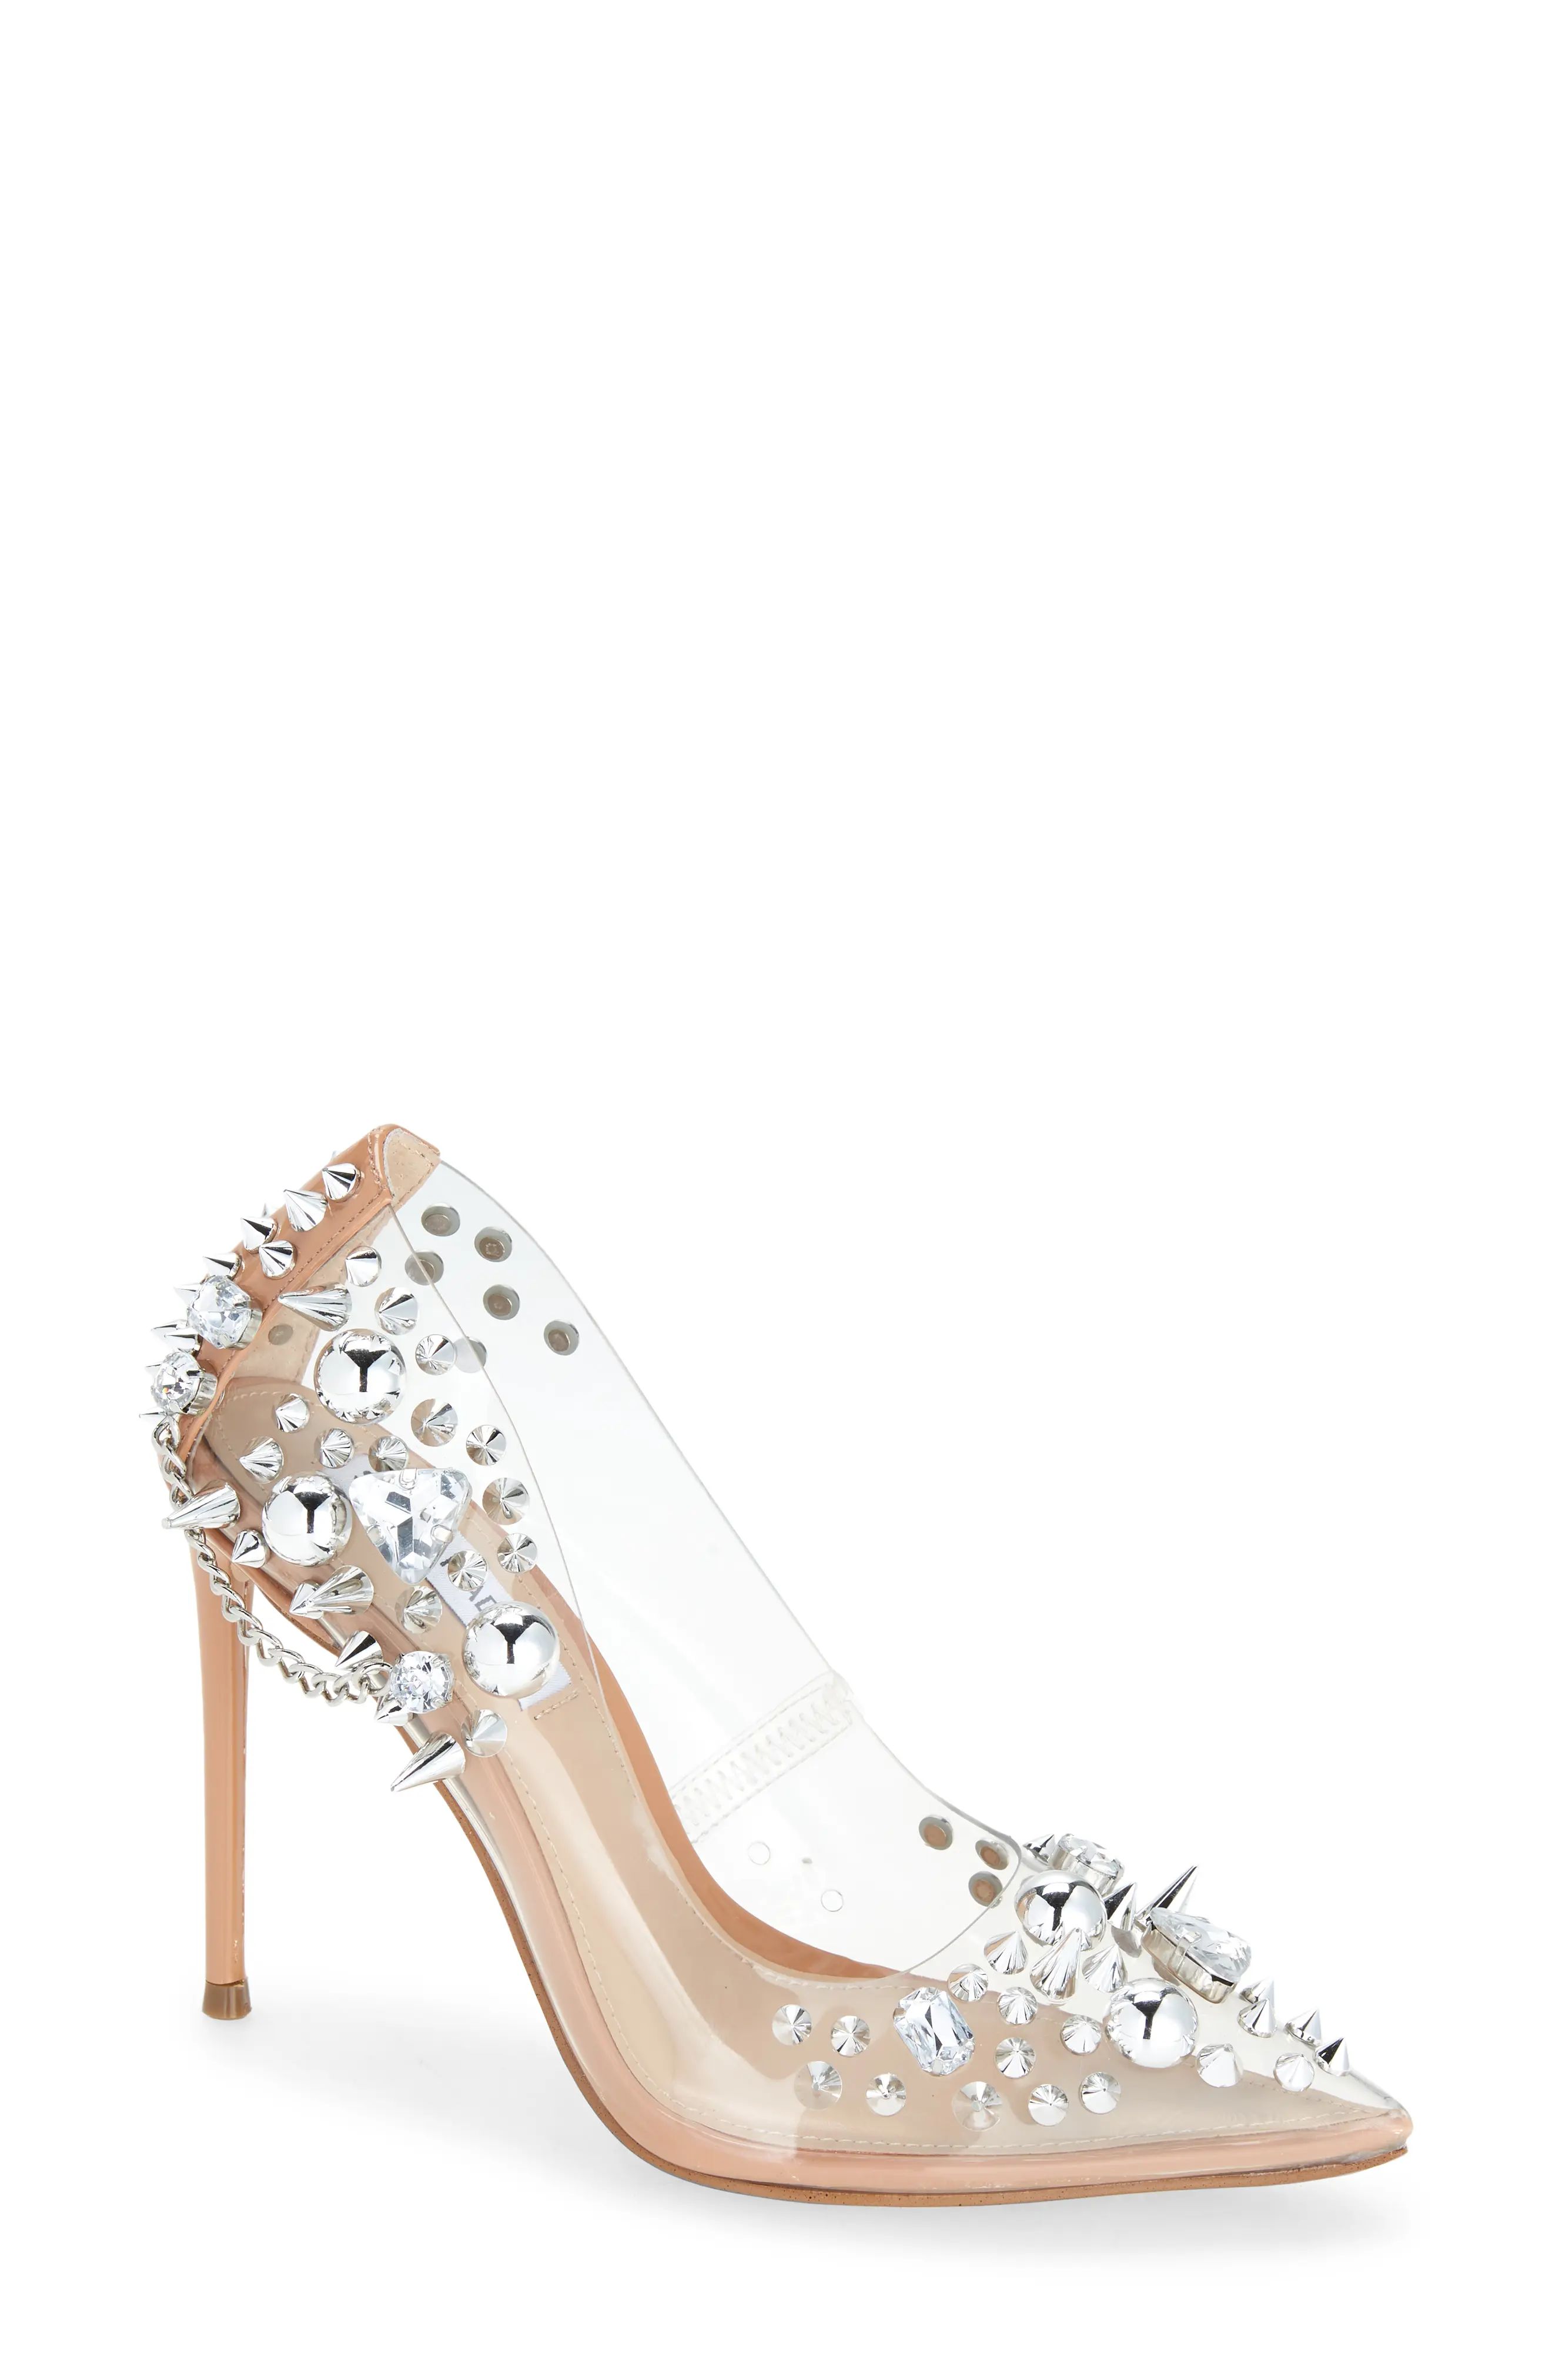 Steve Madden Veronicka Studded Pointed Toe Pump in Clear at Nordstrom, Size 8.5 | Nordstrom